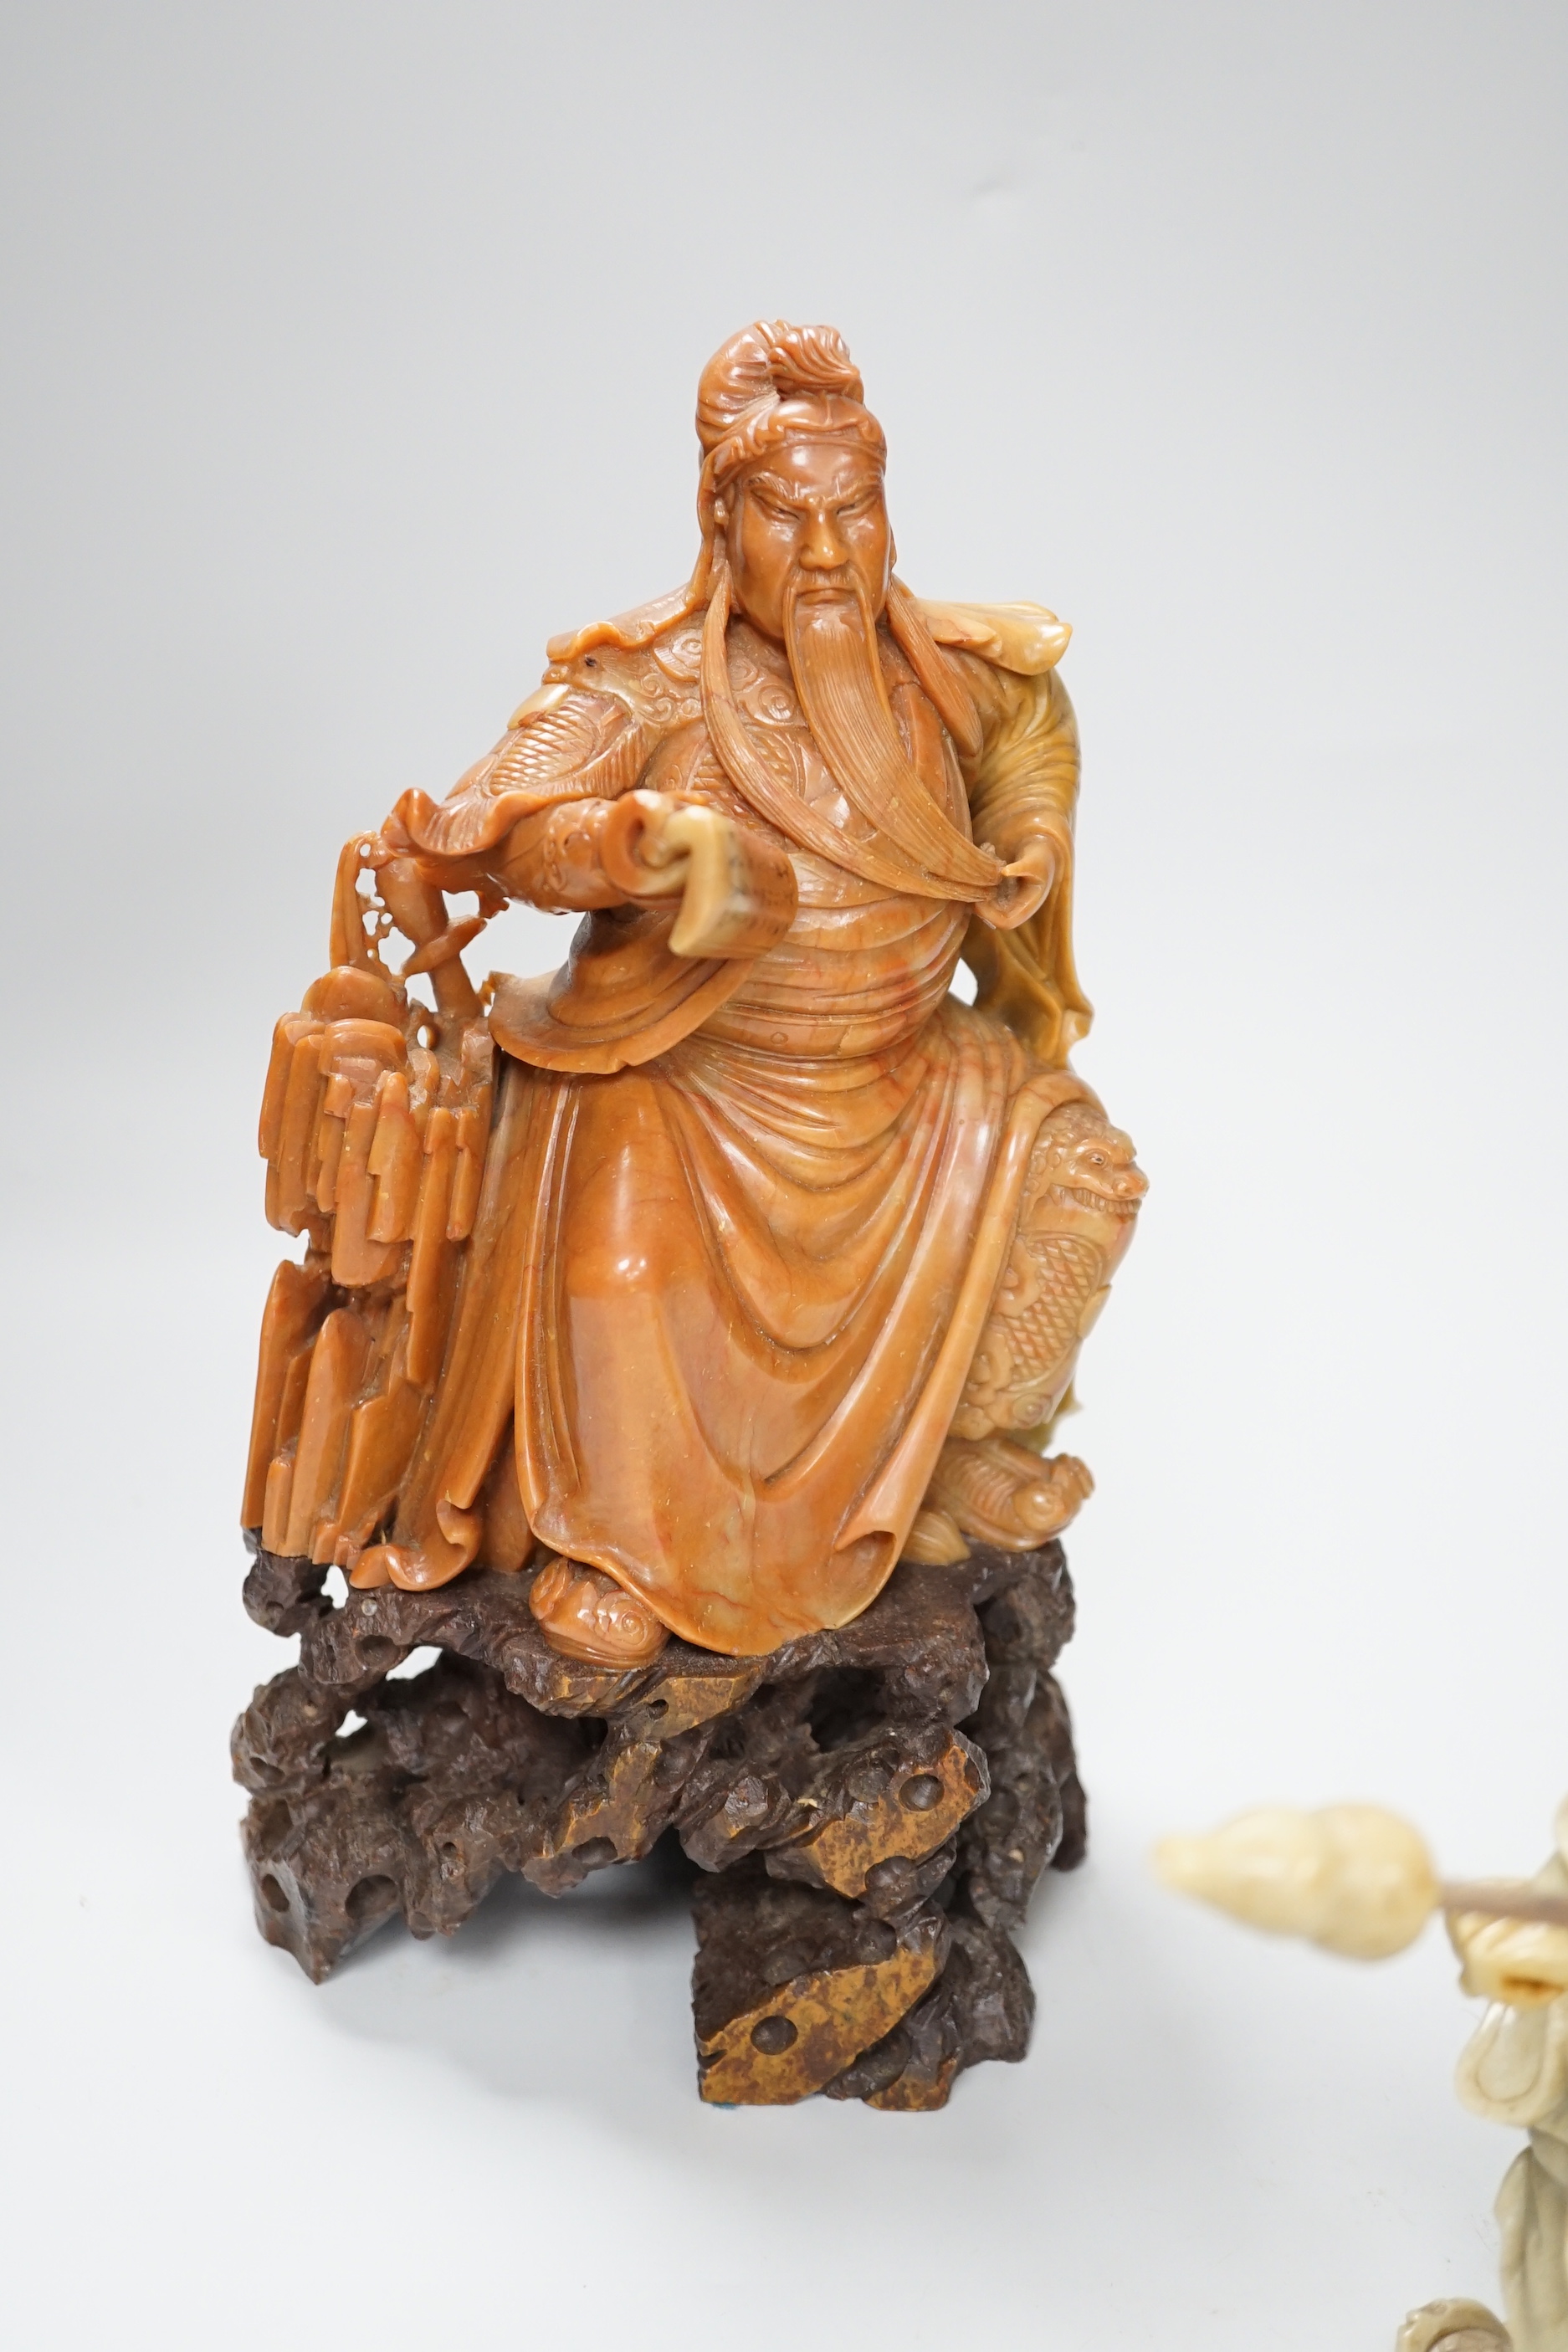 Two Chinese soapstone figures of Confucius and Guan Yu, tallest 26cm high